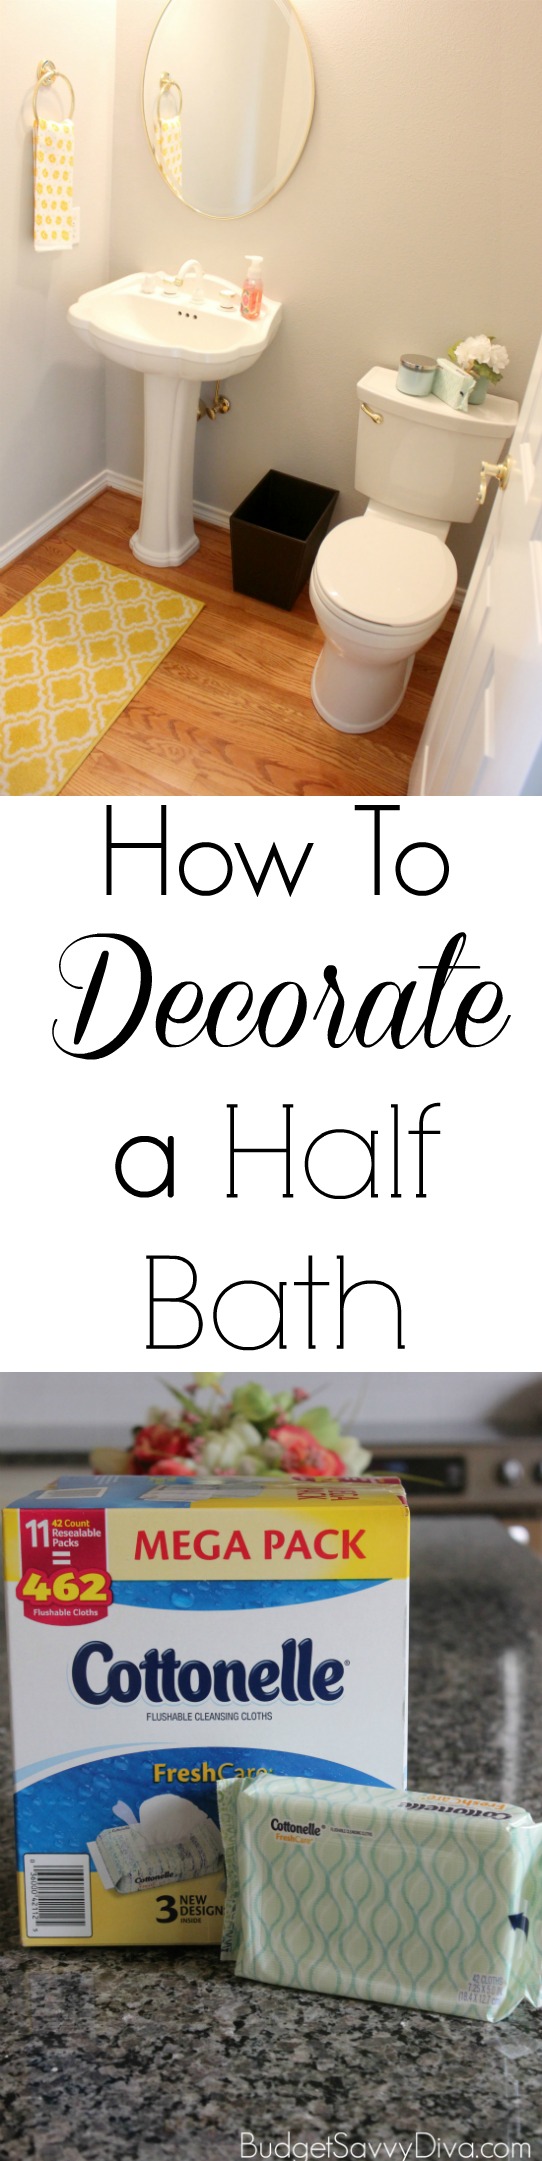 How To Decorate A Half Bath